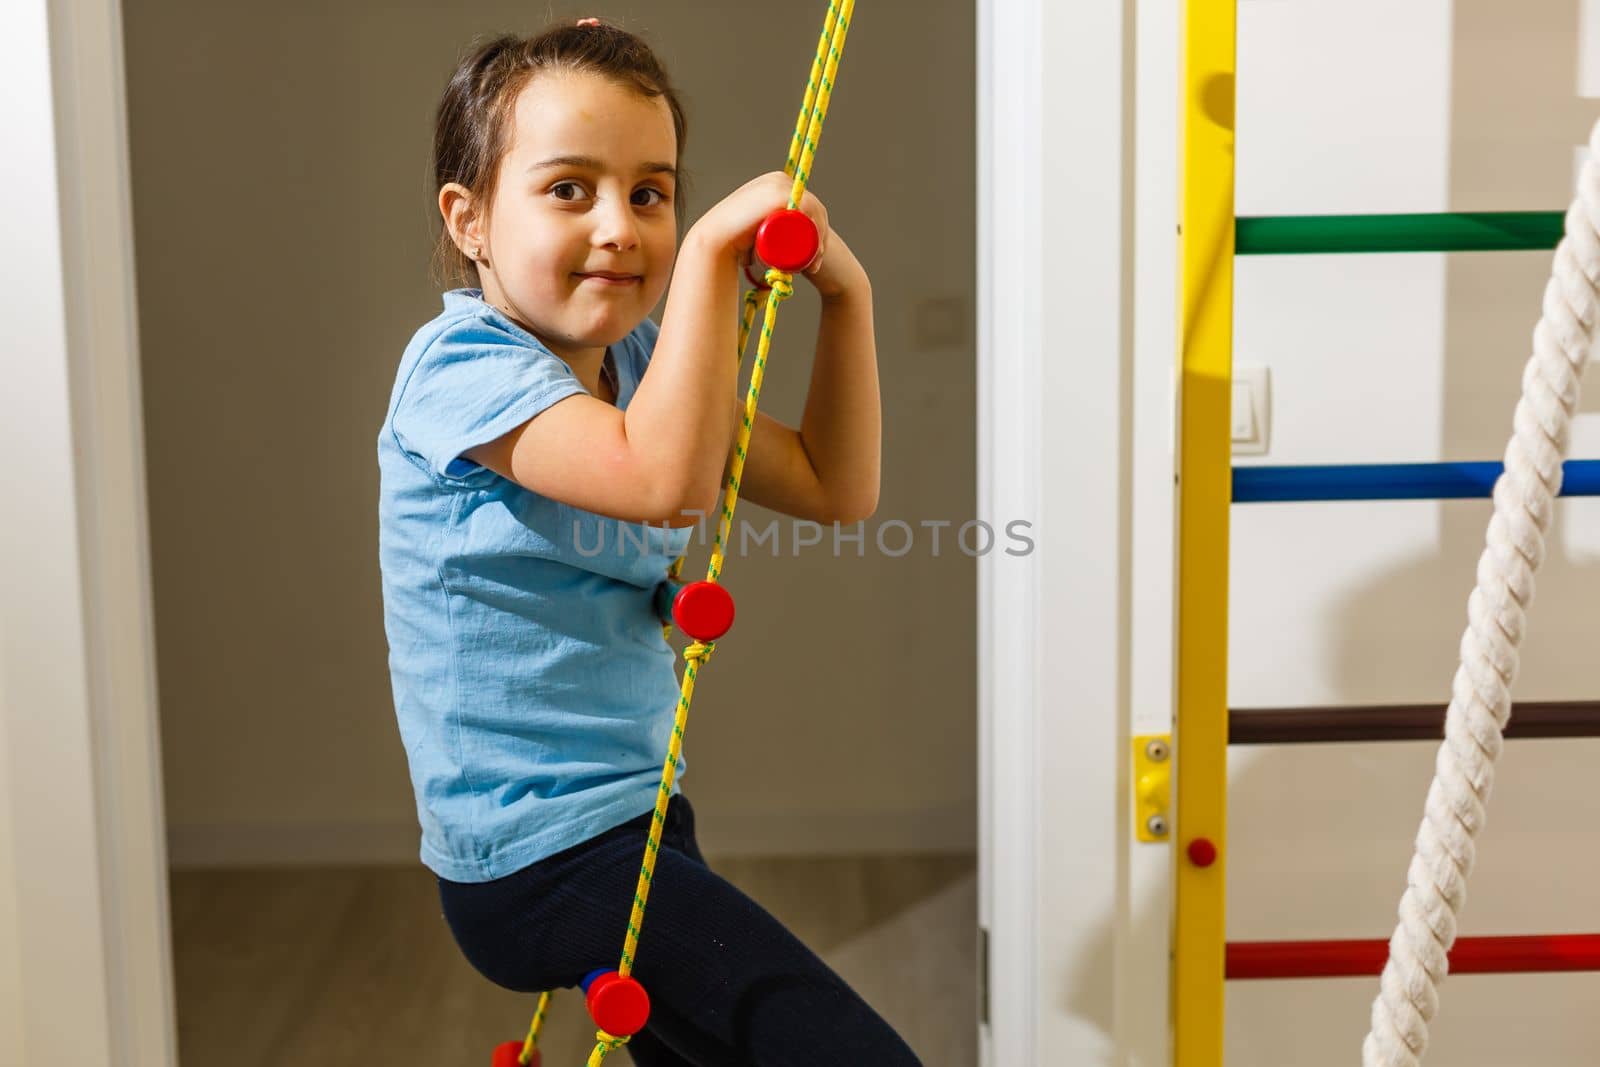 The girl smiles, plays and goes in for sports on the stairs and the Swedish wall in the children's center in special tight clothes and leads a healthy lifestyle under the supervision of her parents.